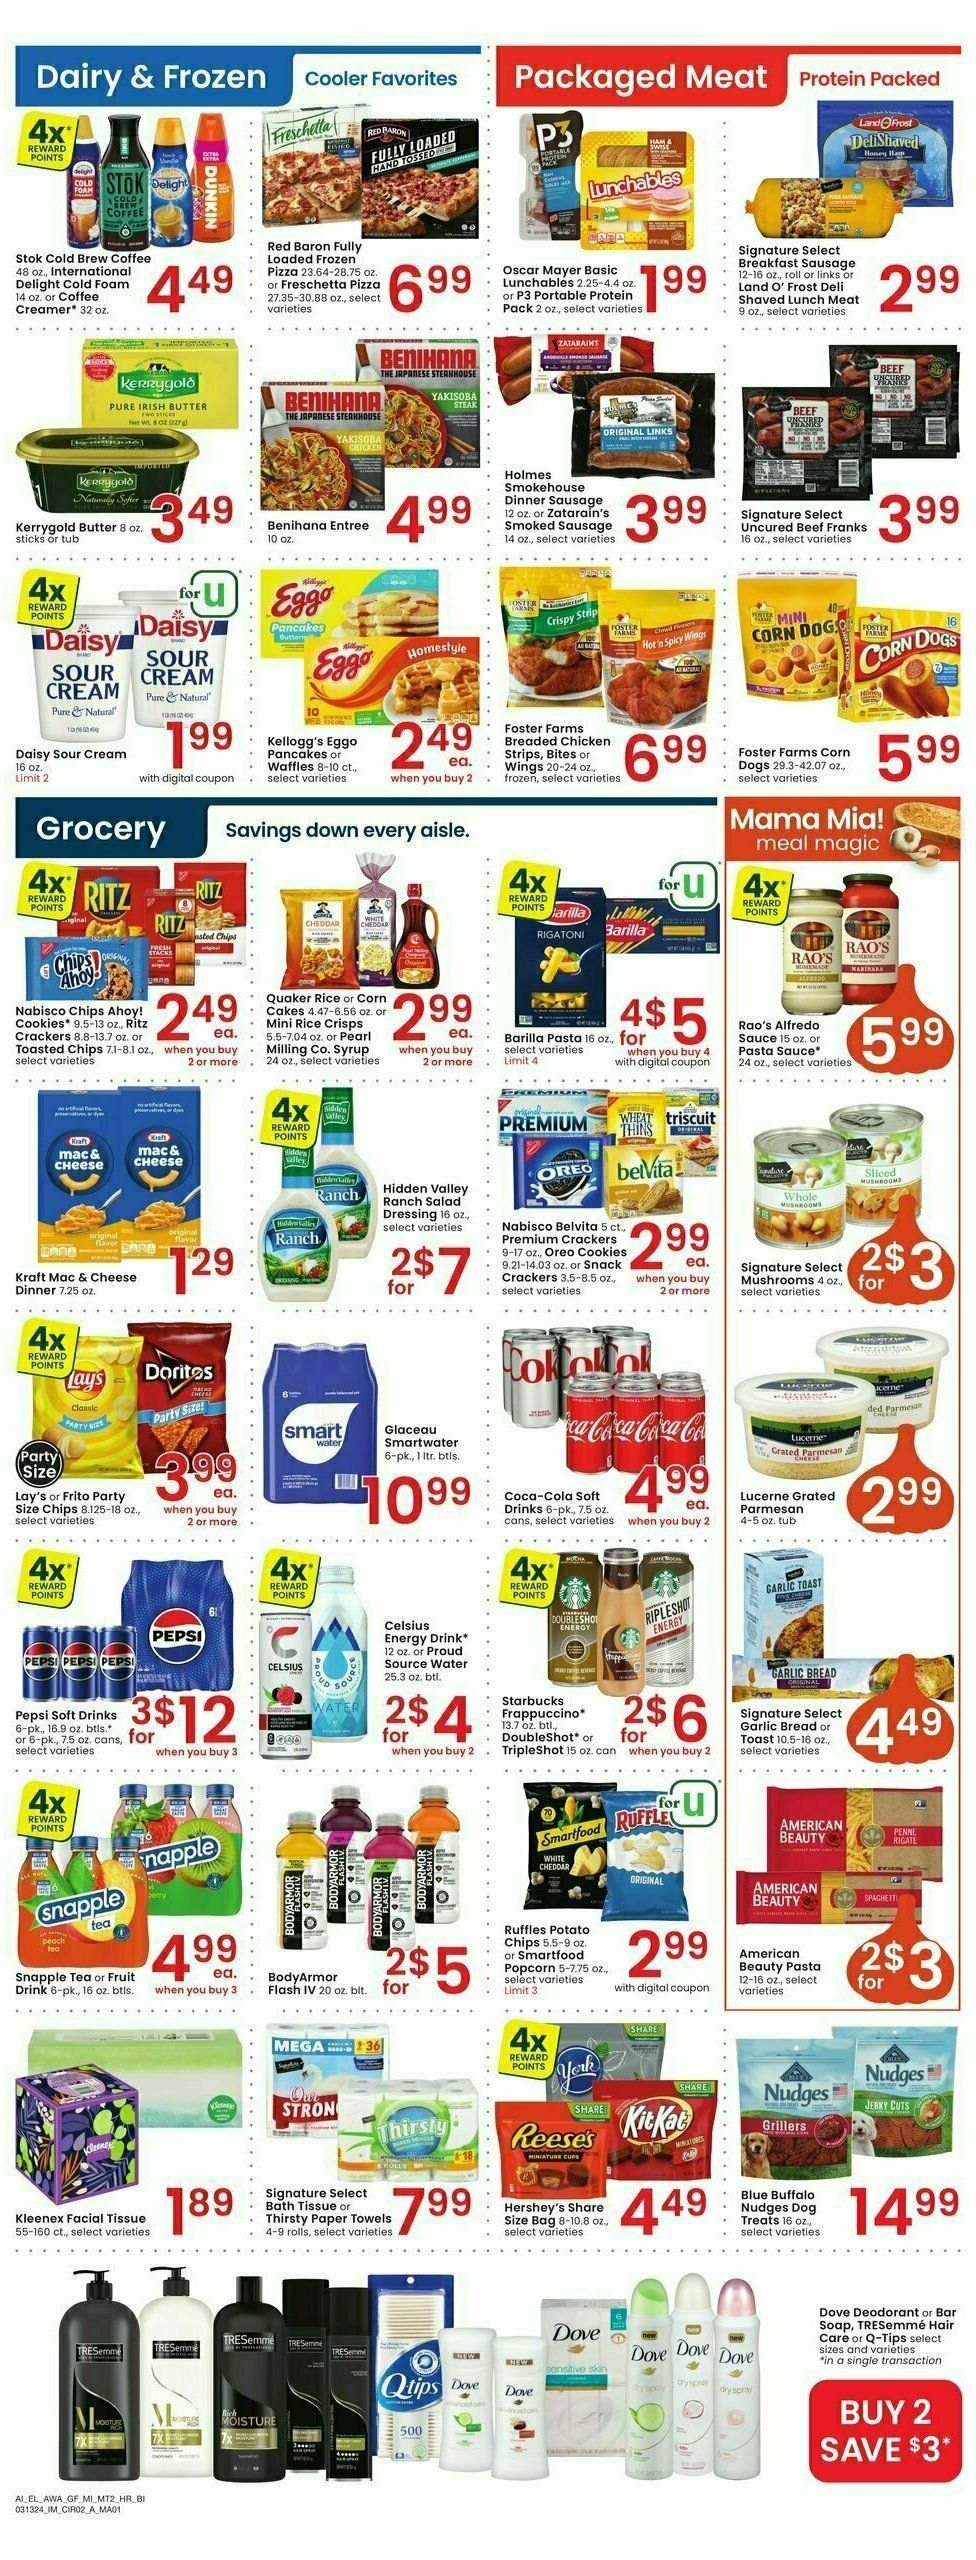 Albertsons Weekly Ad from March 13